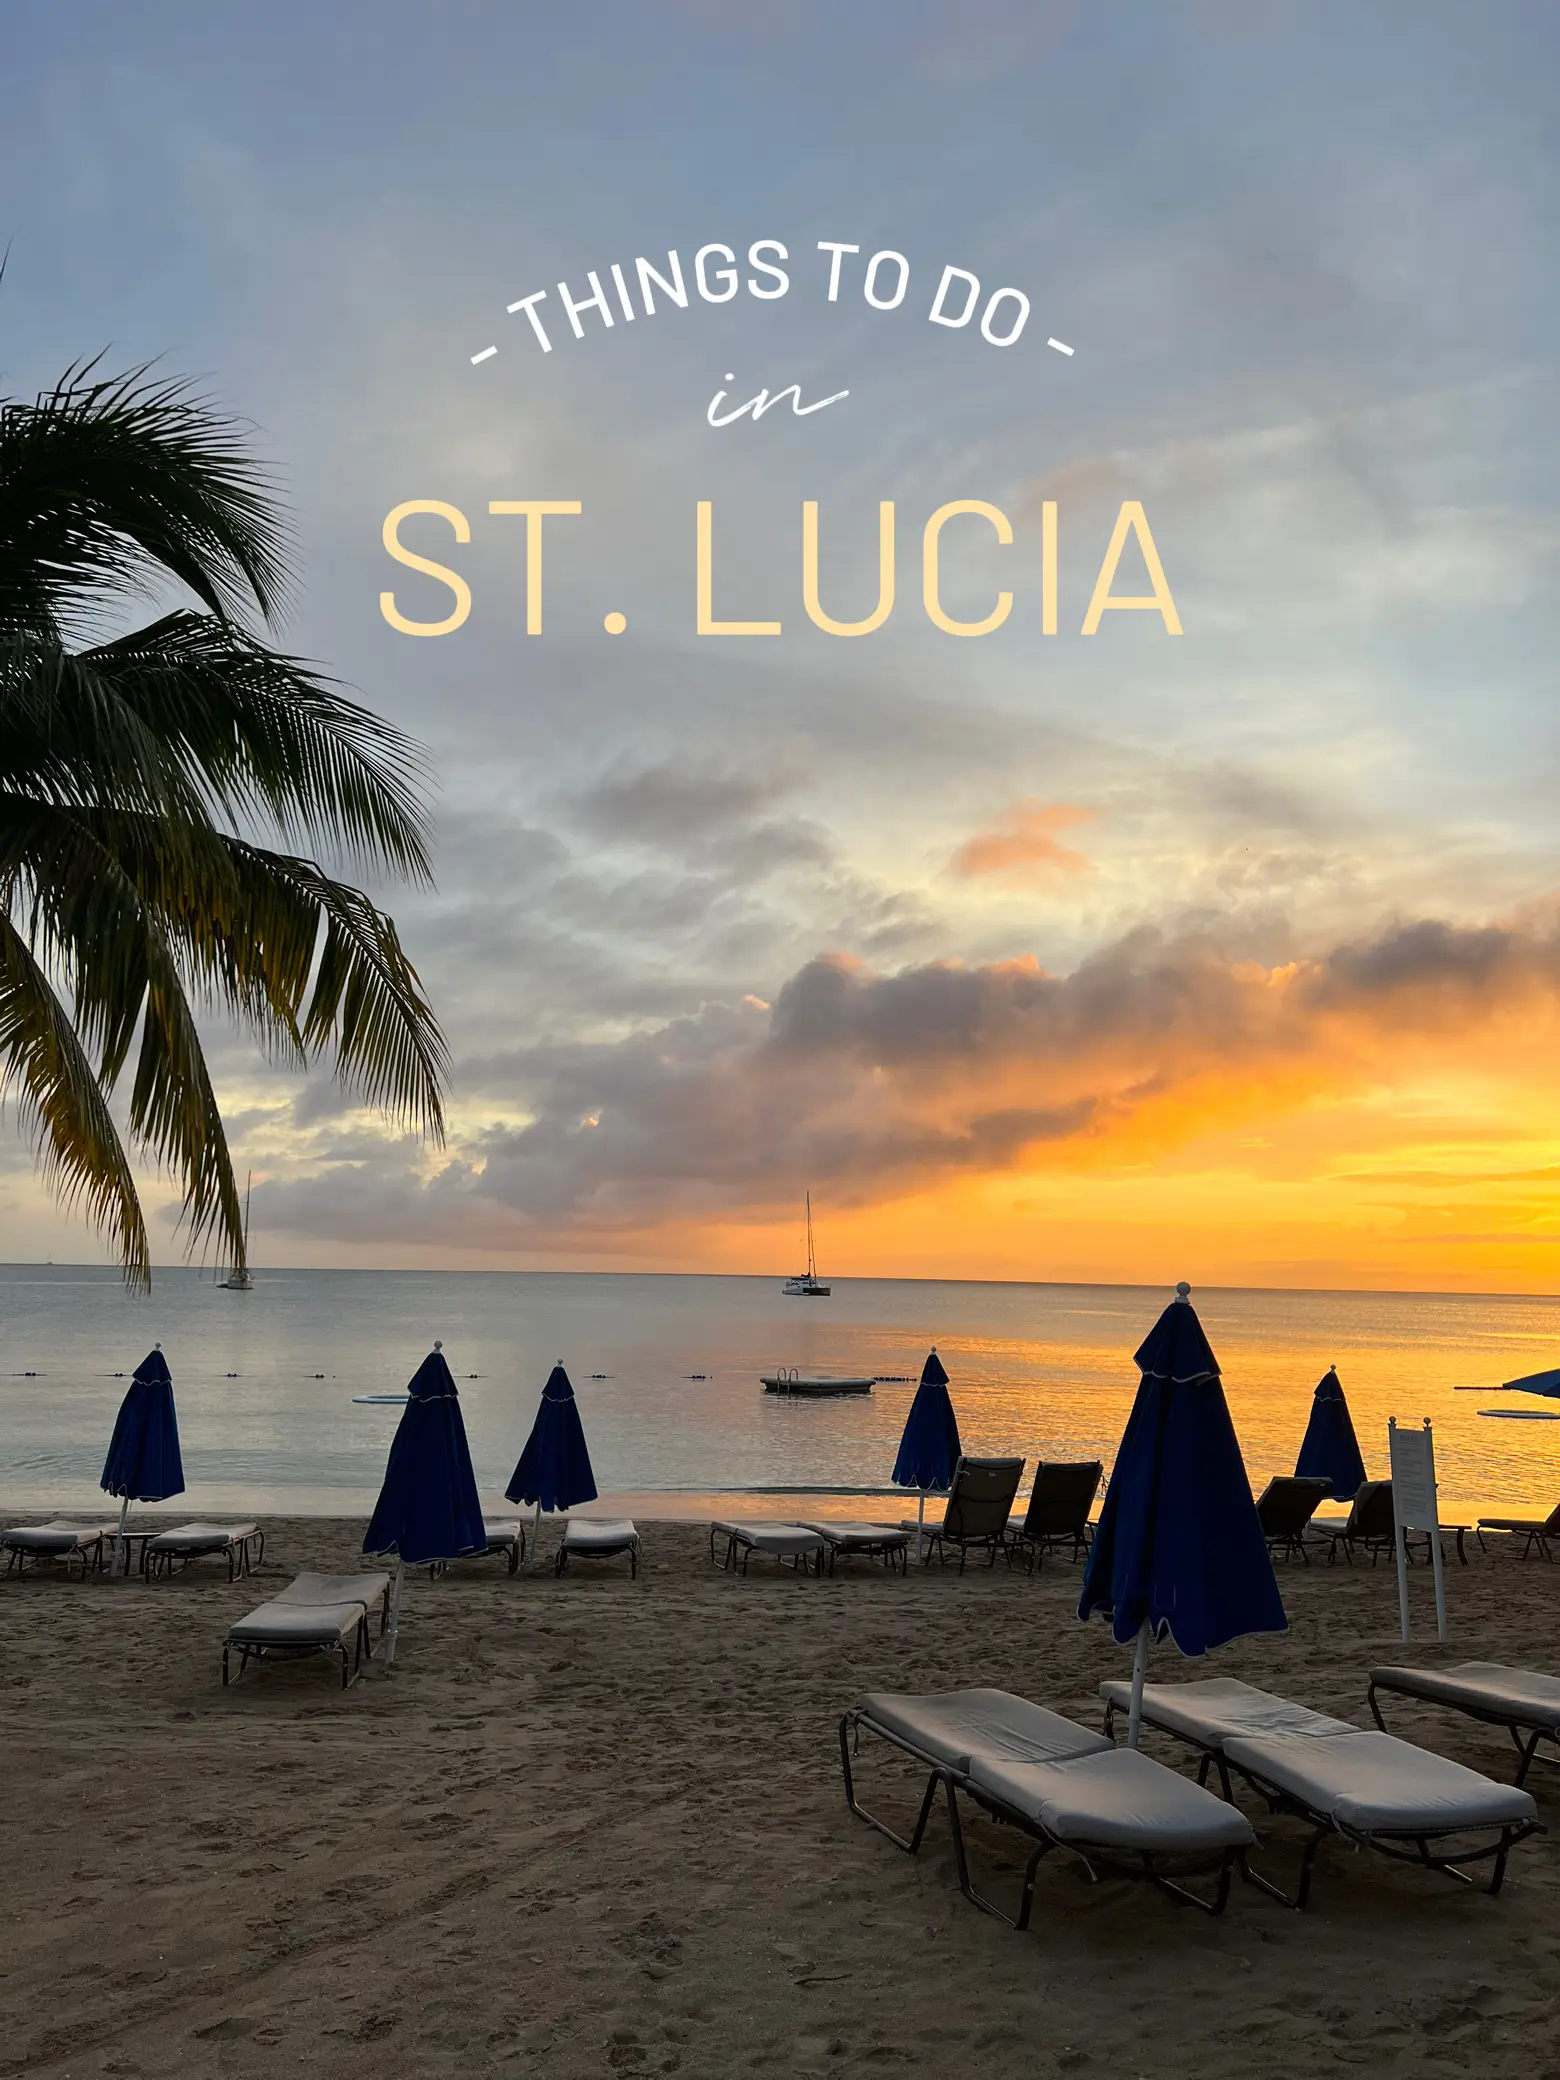 family-friendly St. Lucia vacation - Lemon8 Search